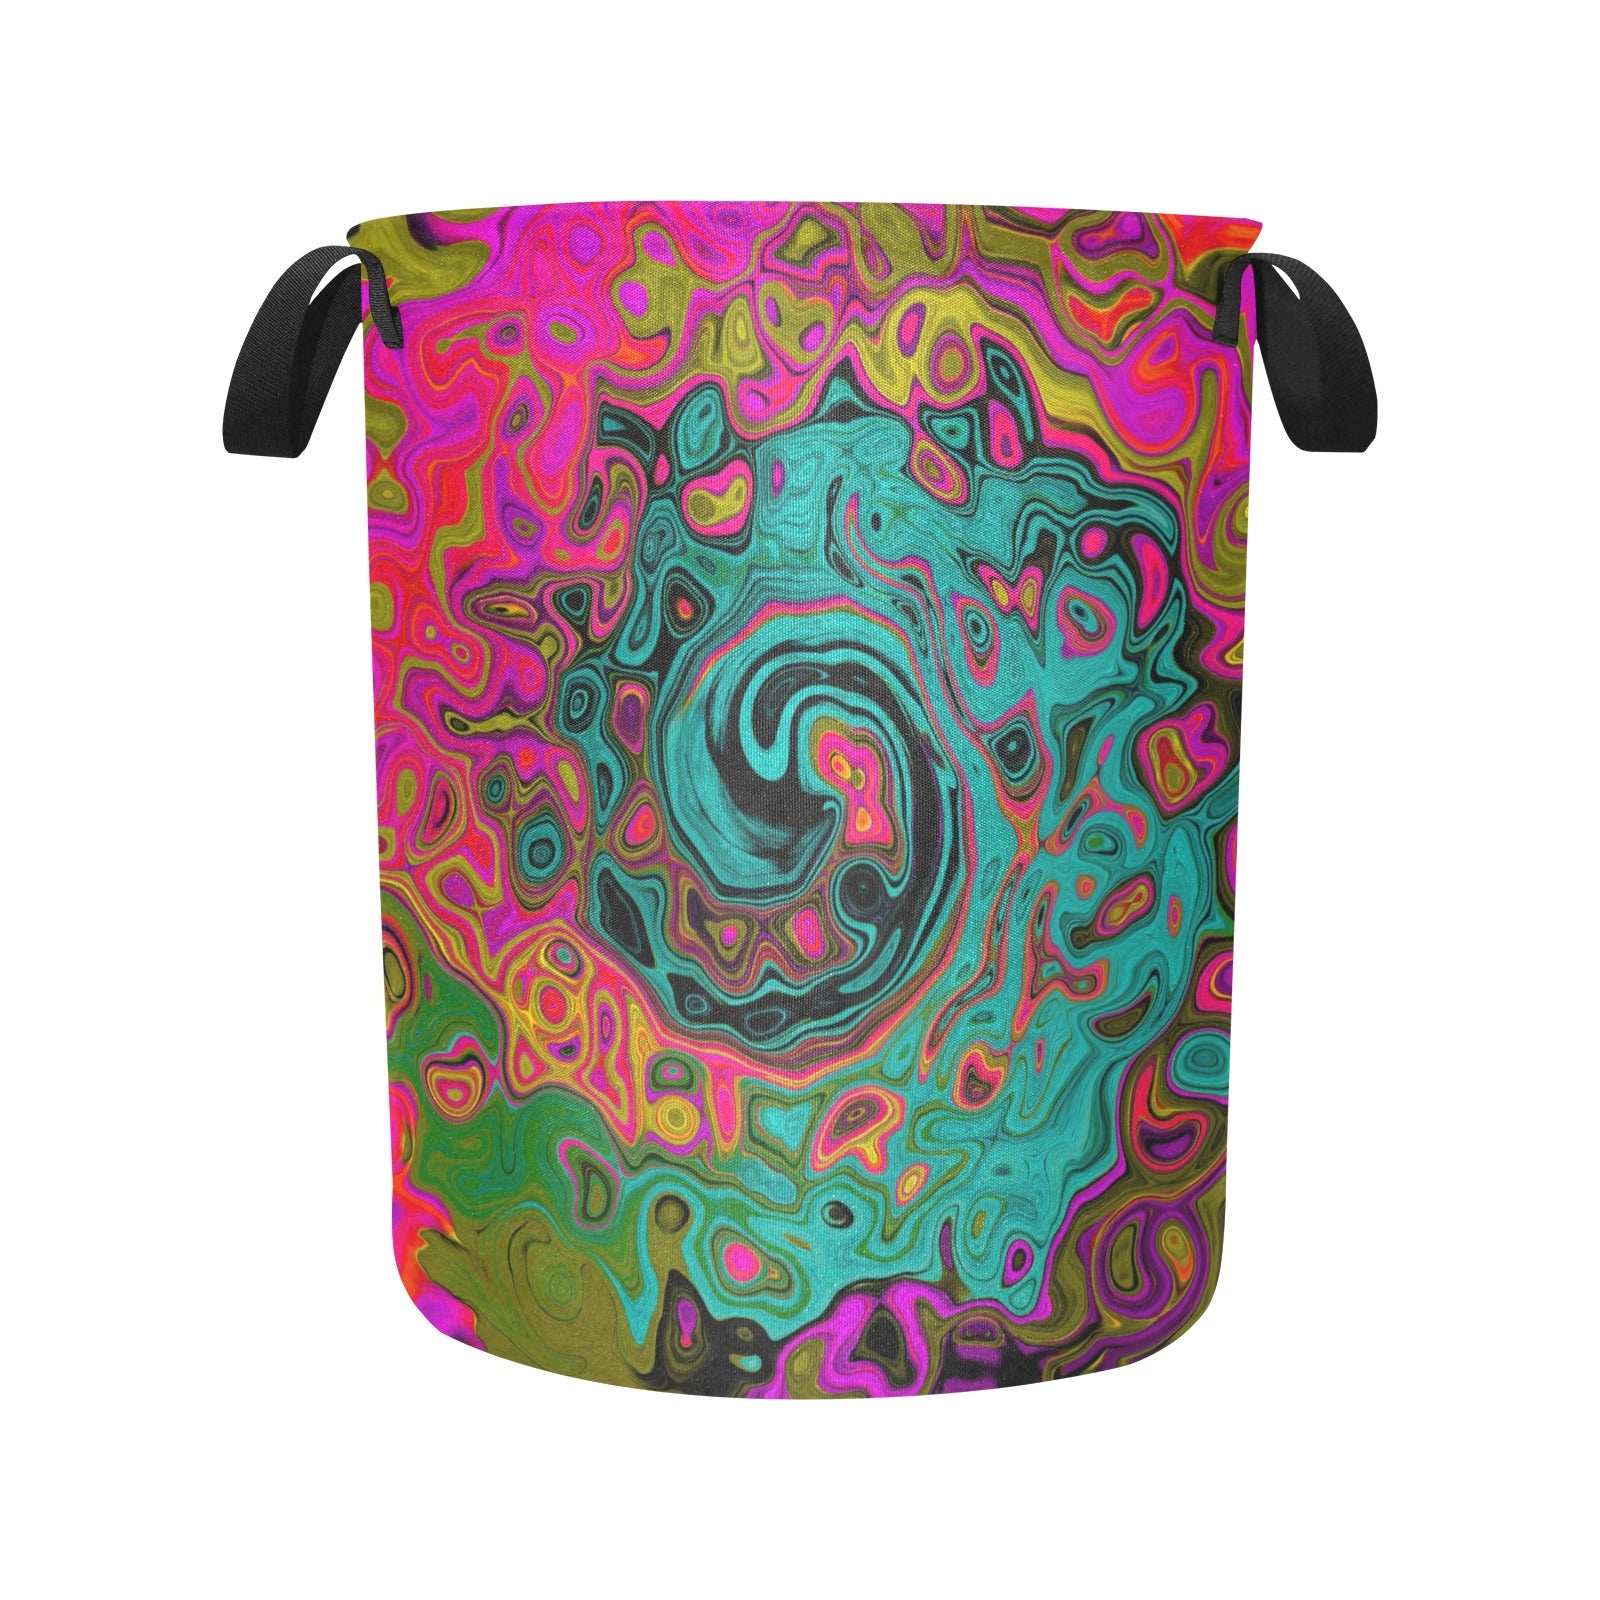 Fabric Laundry Basket with Handles, Trippy Turquoise Abstract Retro Liquid Swirl